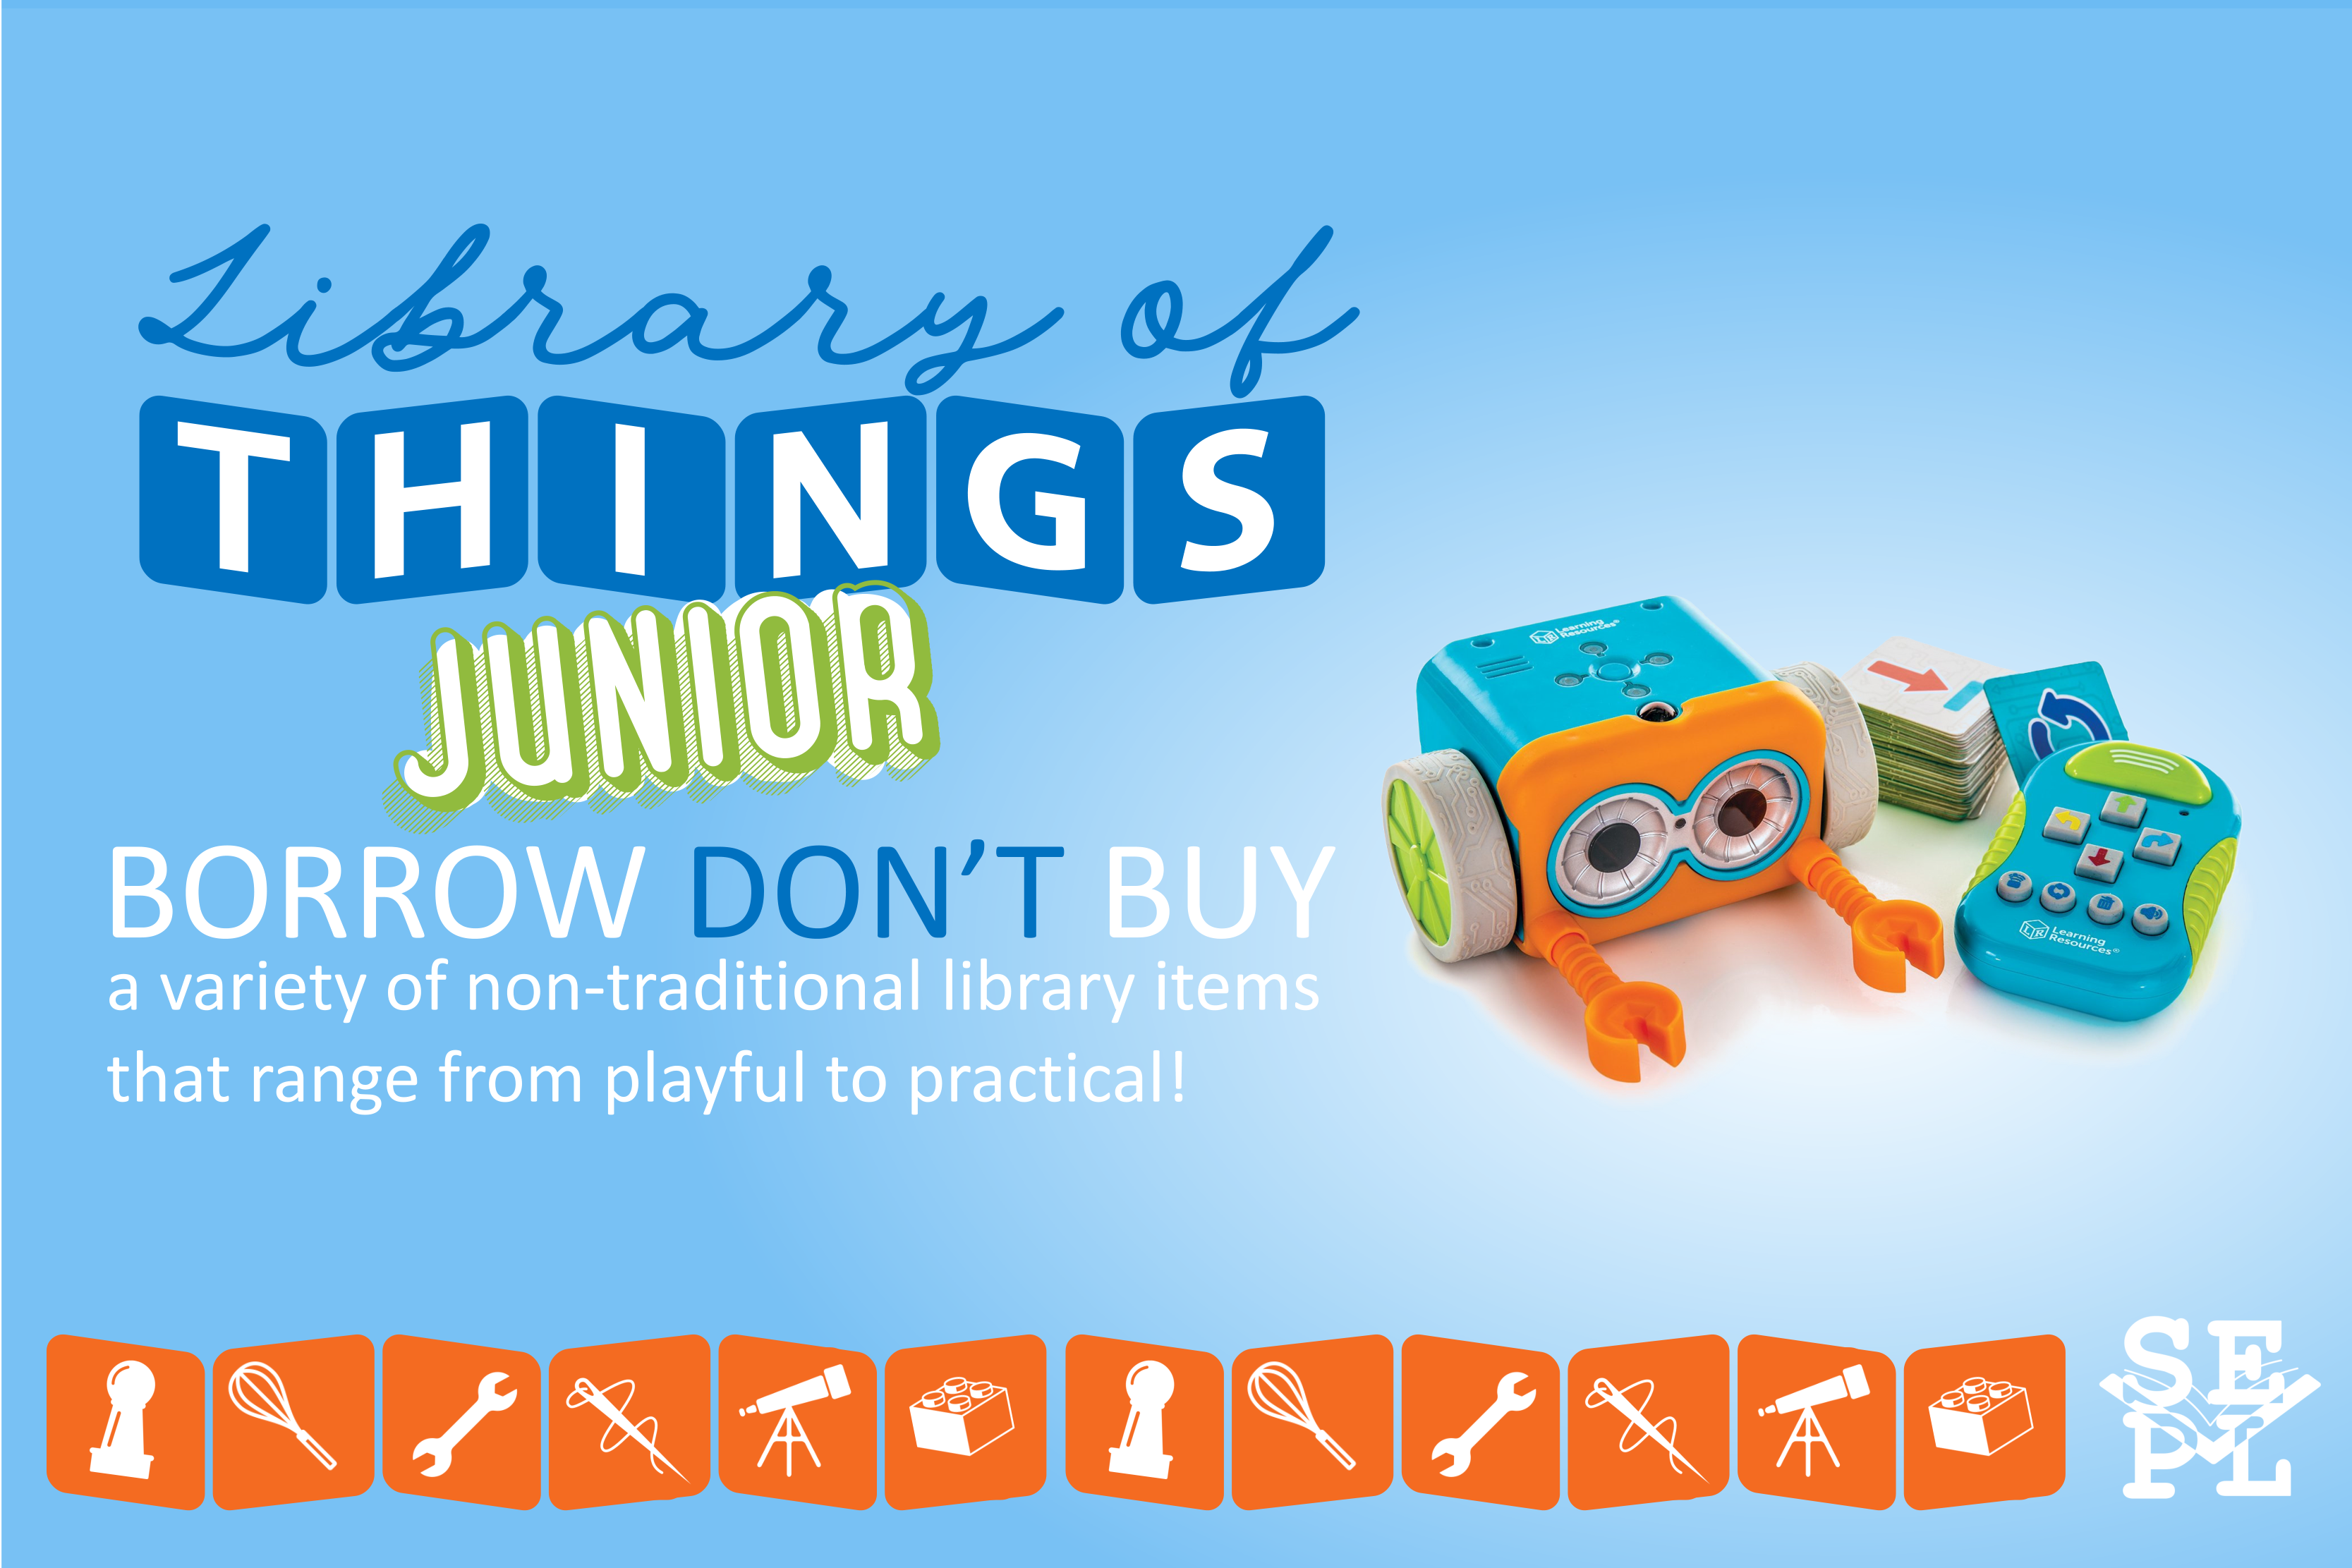 Library of Things Junior –– Borrow Don't Buy a variety of non-traditional items that range from playful to practical!